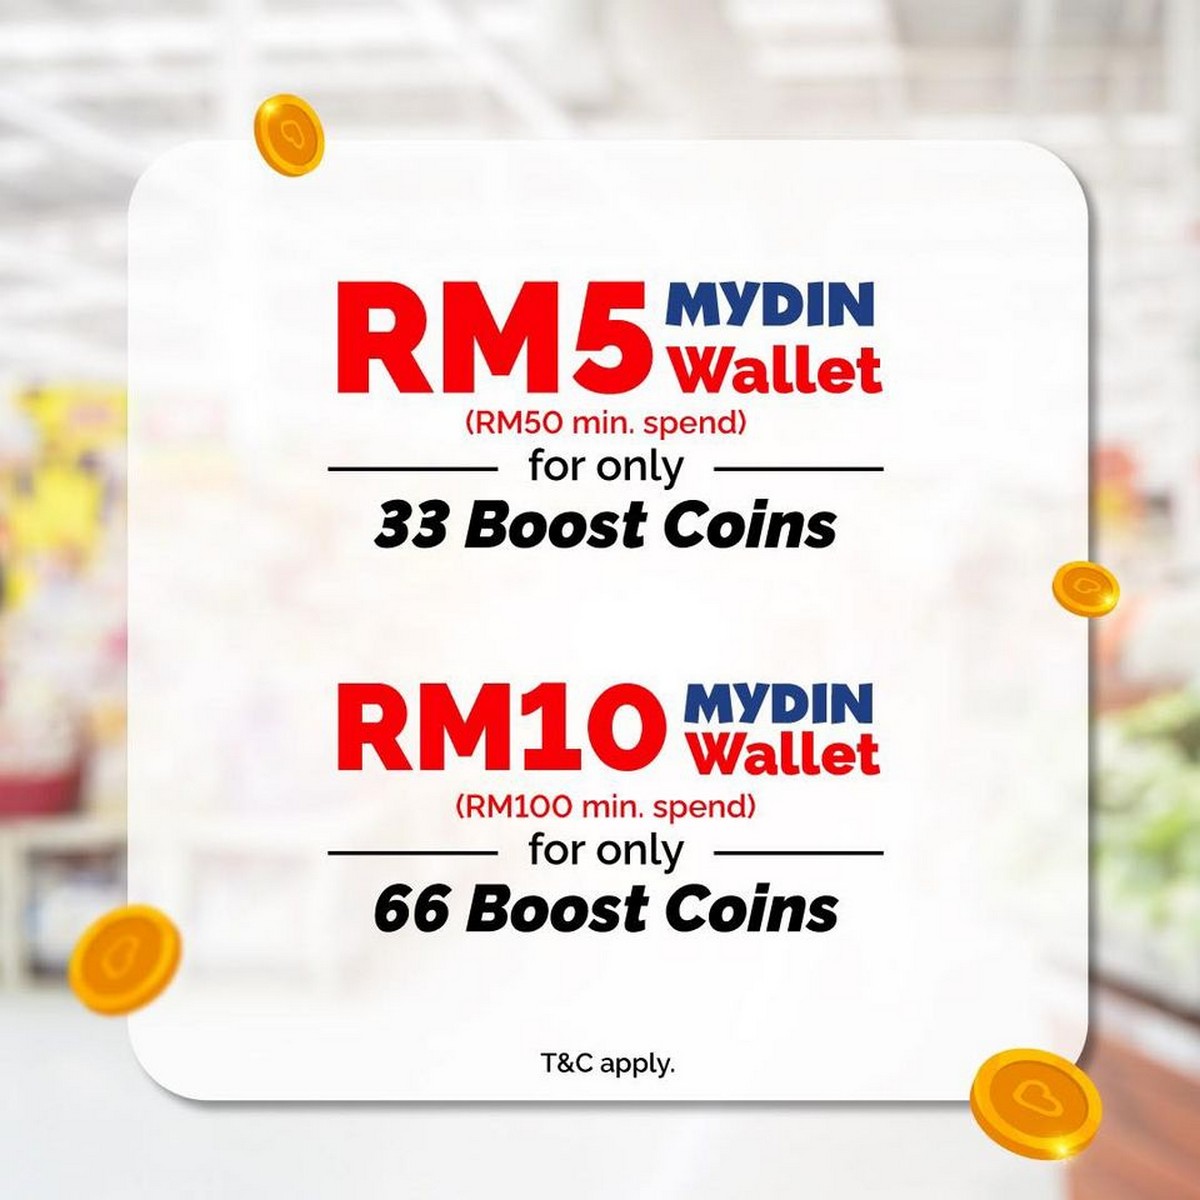 ii.-Mydin-consumer-cash-rebate-Get-up-to-RM15-Need-Boost-Coin-to-exchange - News 